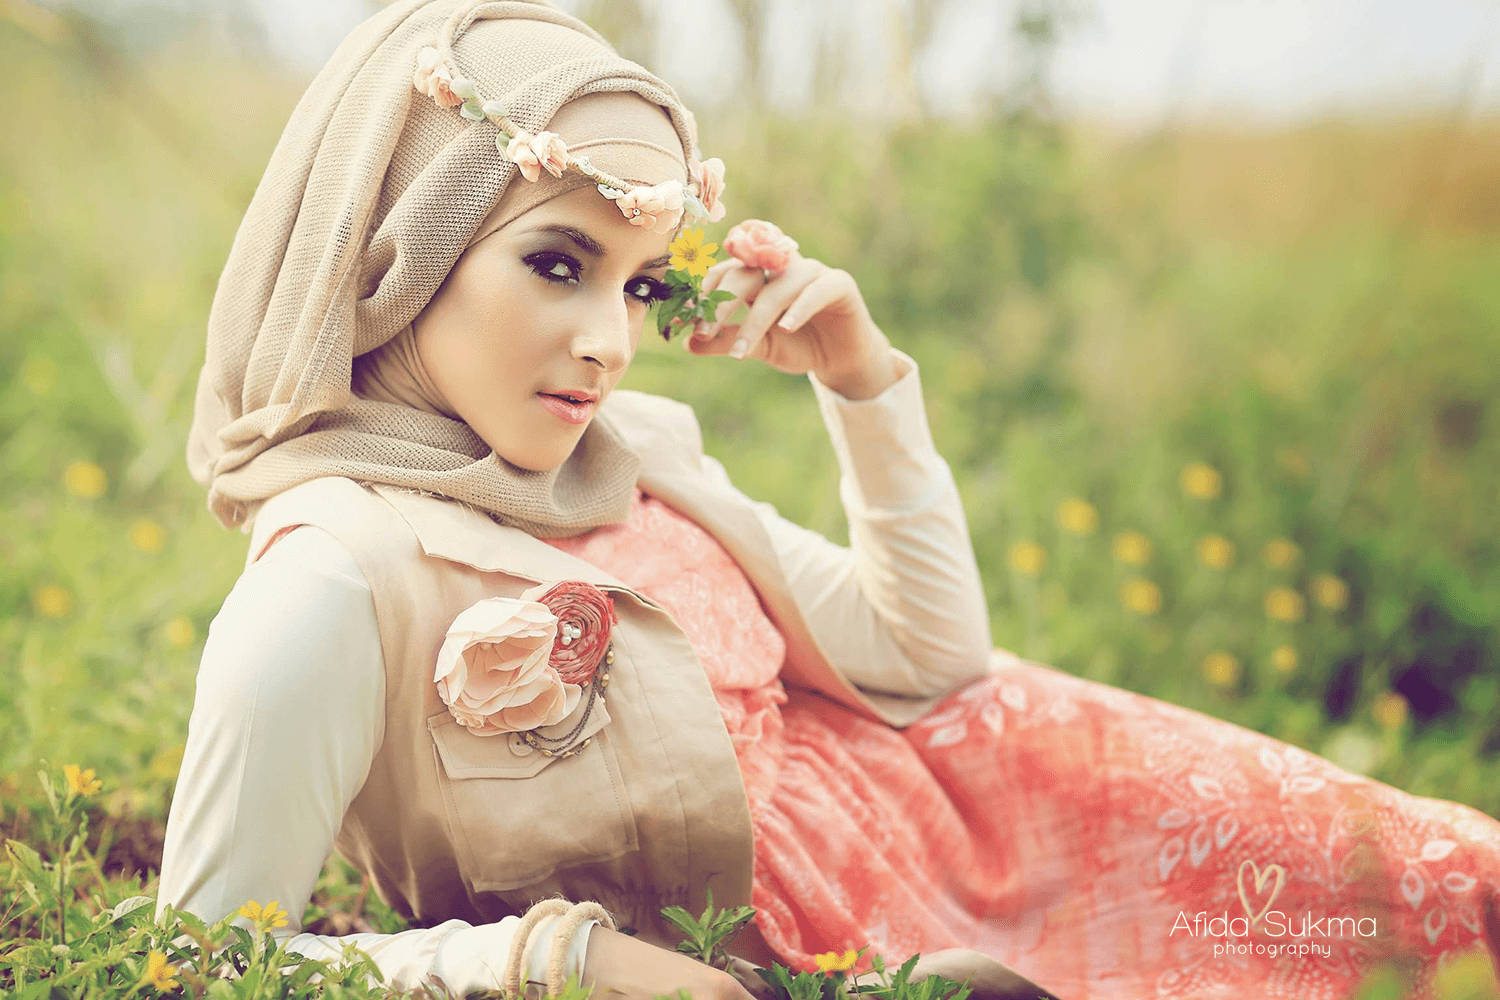 Hijab Girl With Flowers Wallpaper